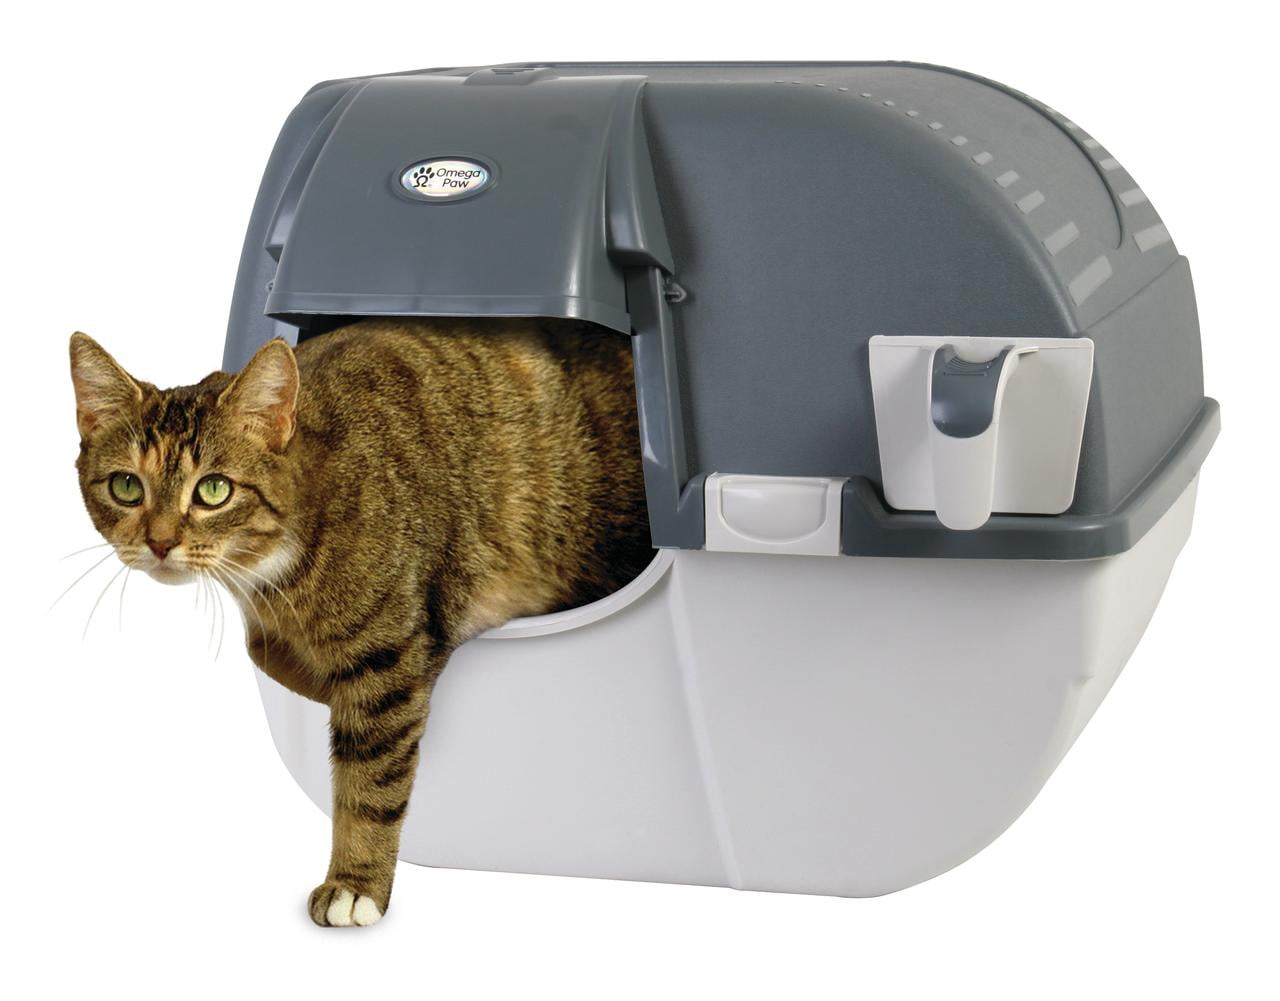 Omega Paw NRA15-1 Improved Roll 'n Clean Self Cleaning Litter Box 